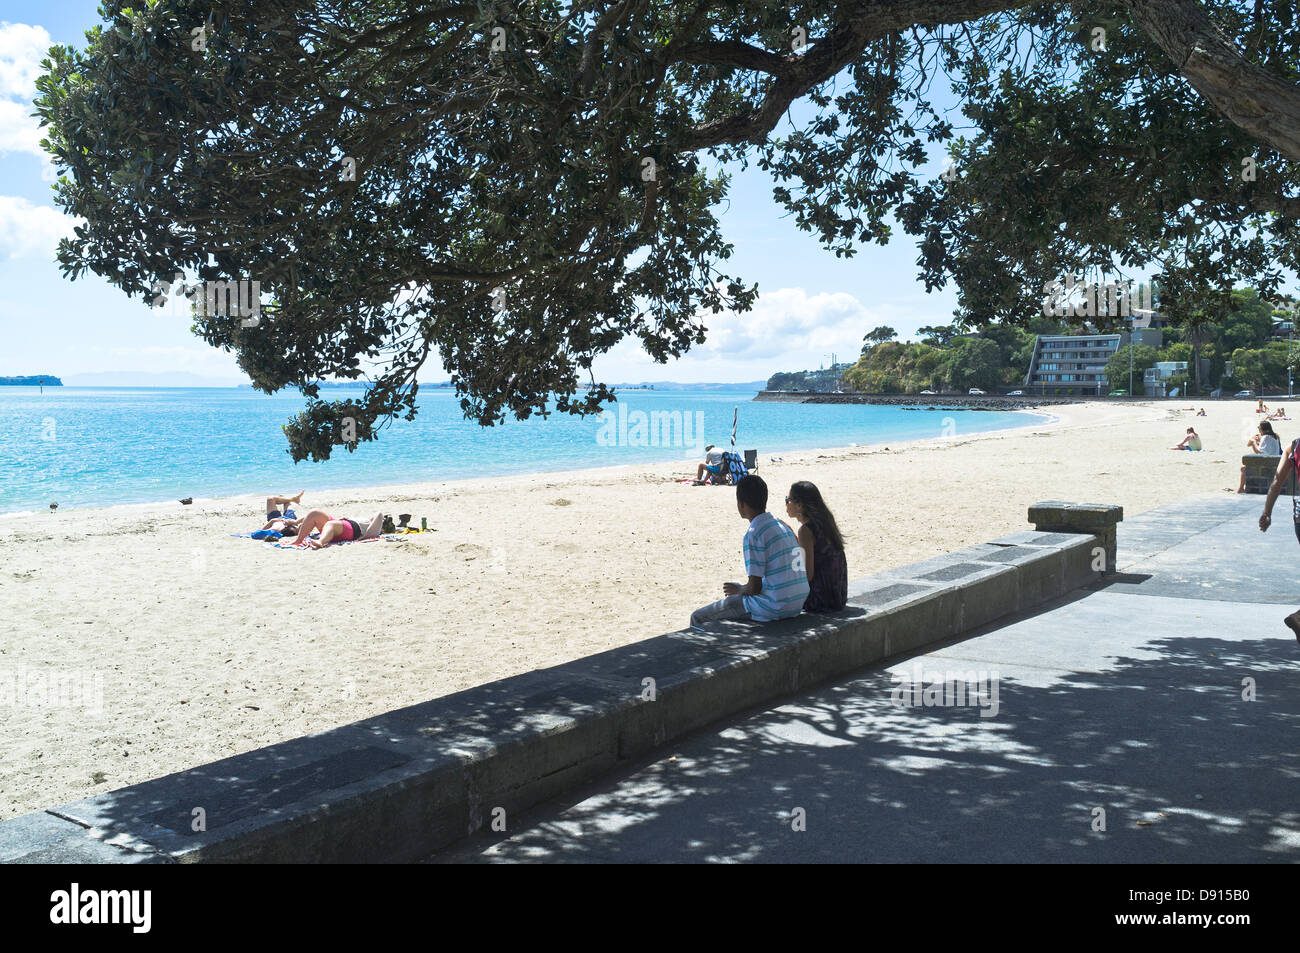 dh North island beaches AUCKLAND MISSION BAY NEW ZEALAND NZ Couple sitting on prome wall overlooking sandy beach nz people Stock Photo